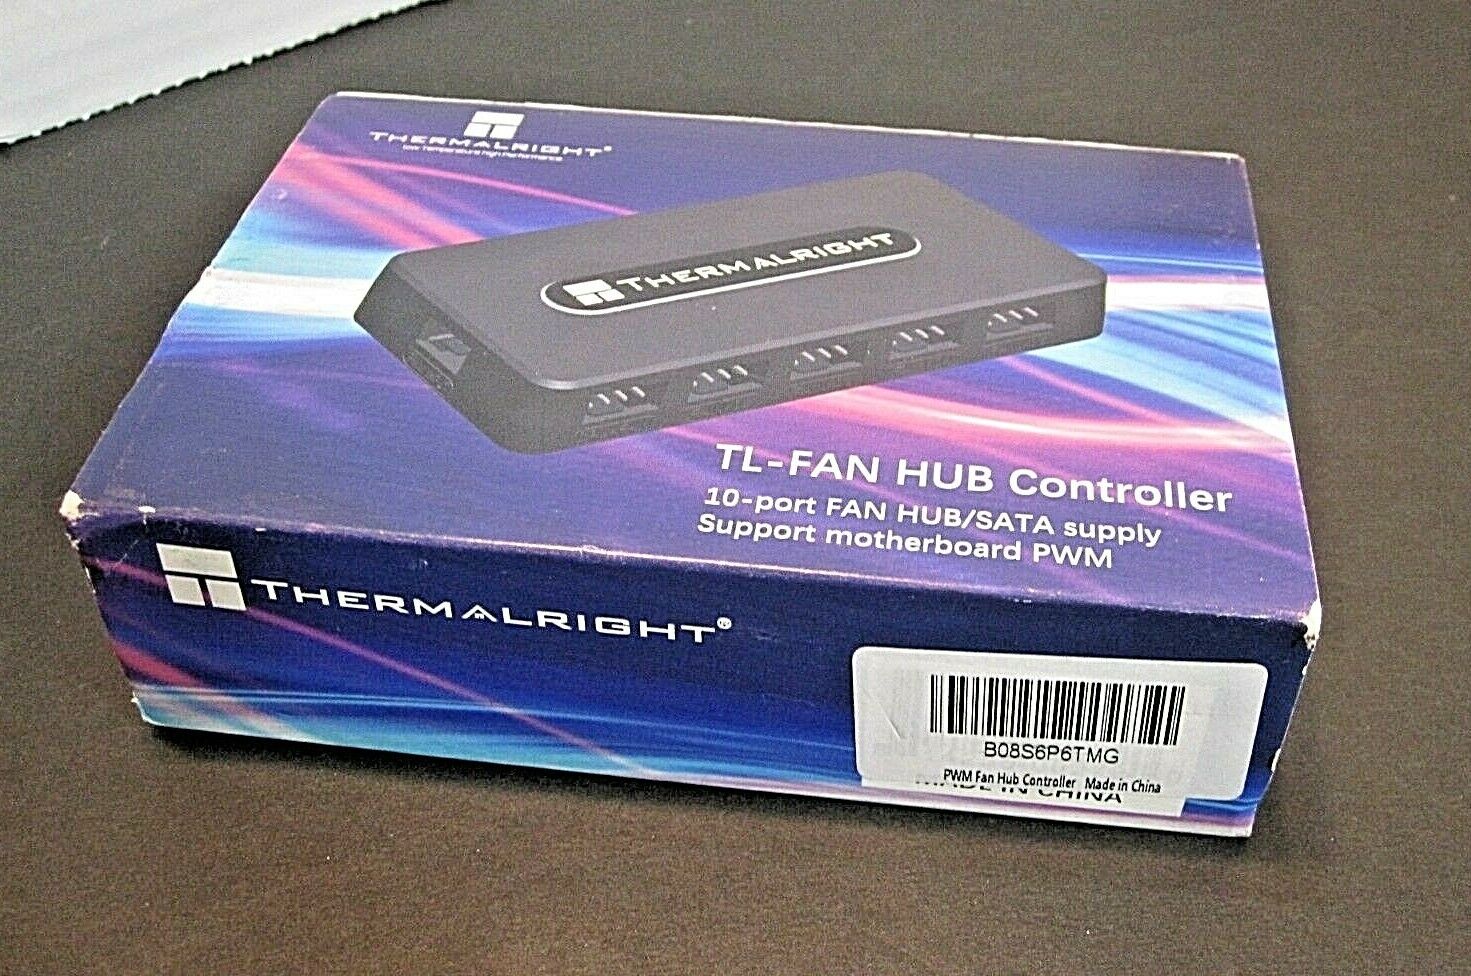 Thermalright TL-Fan Hub Controller 10 Port Hub/Sata Supply made by Thermalright 